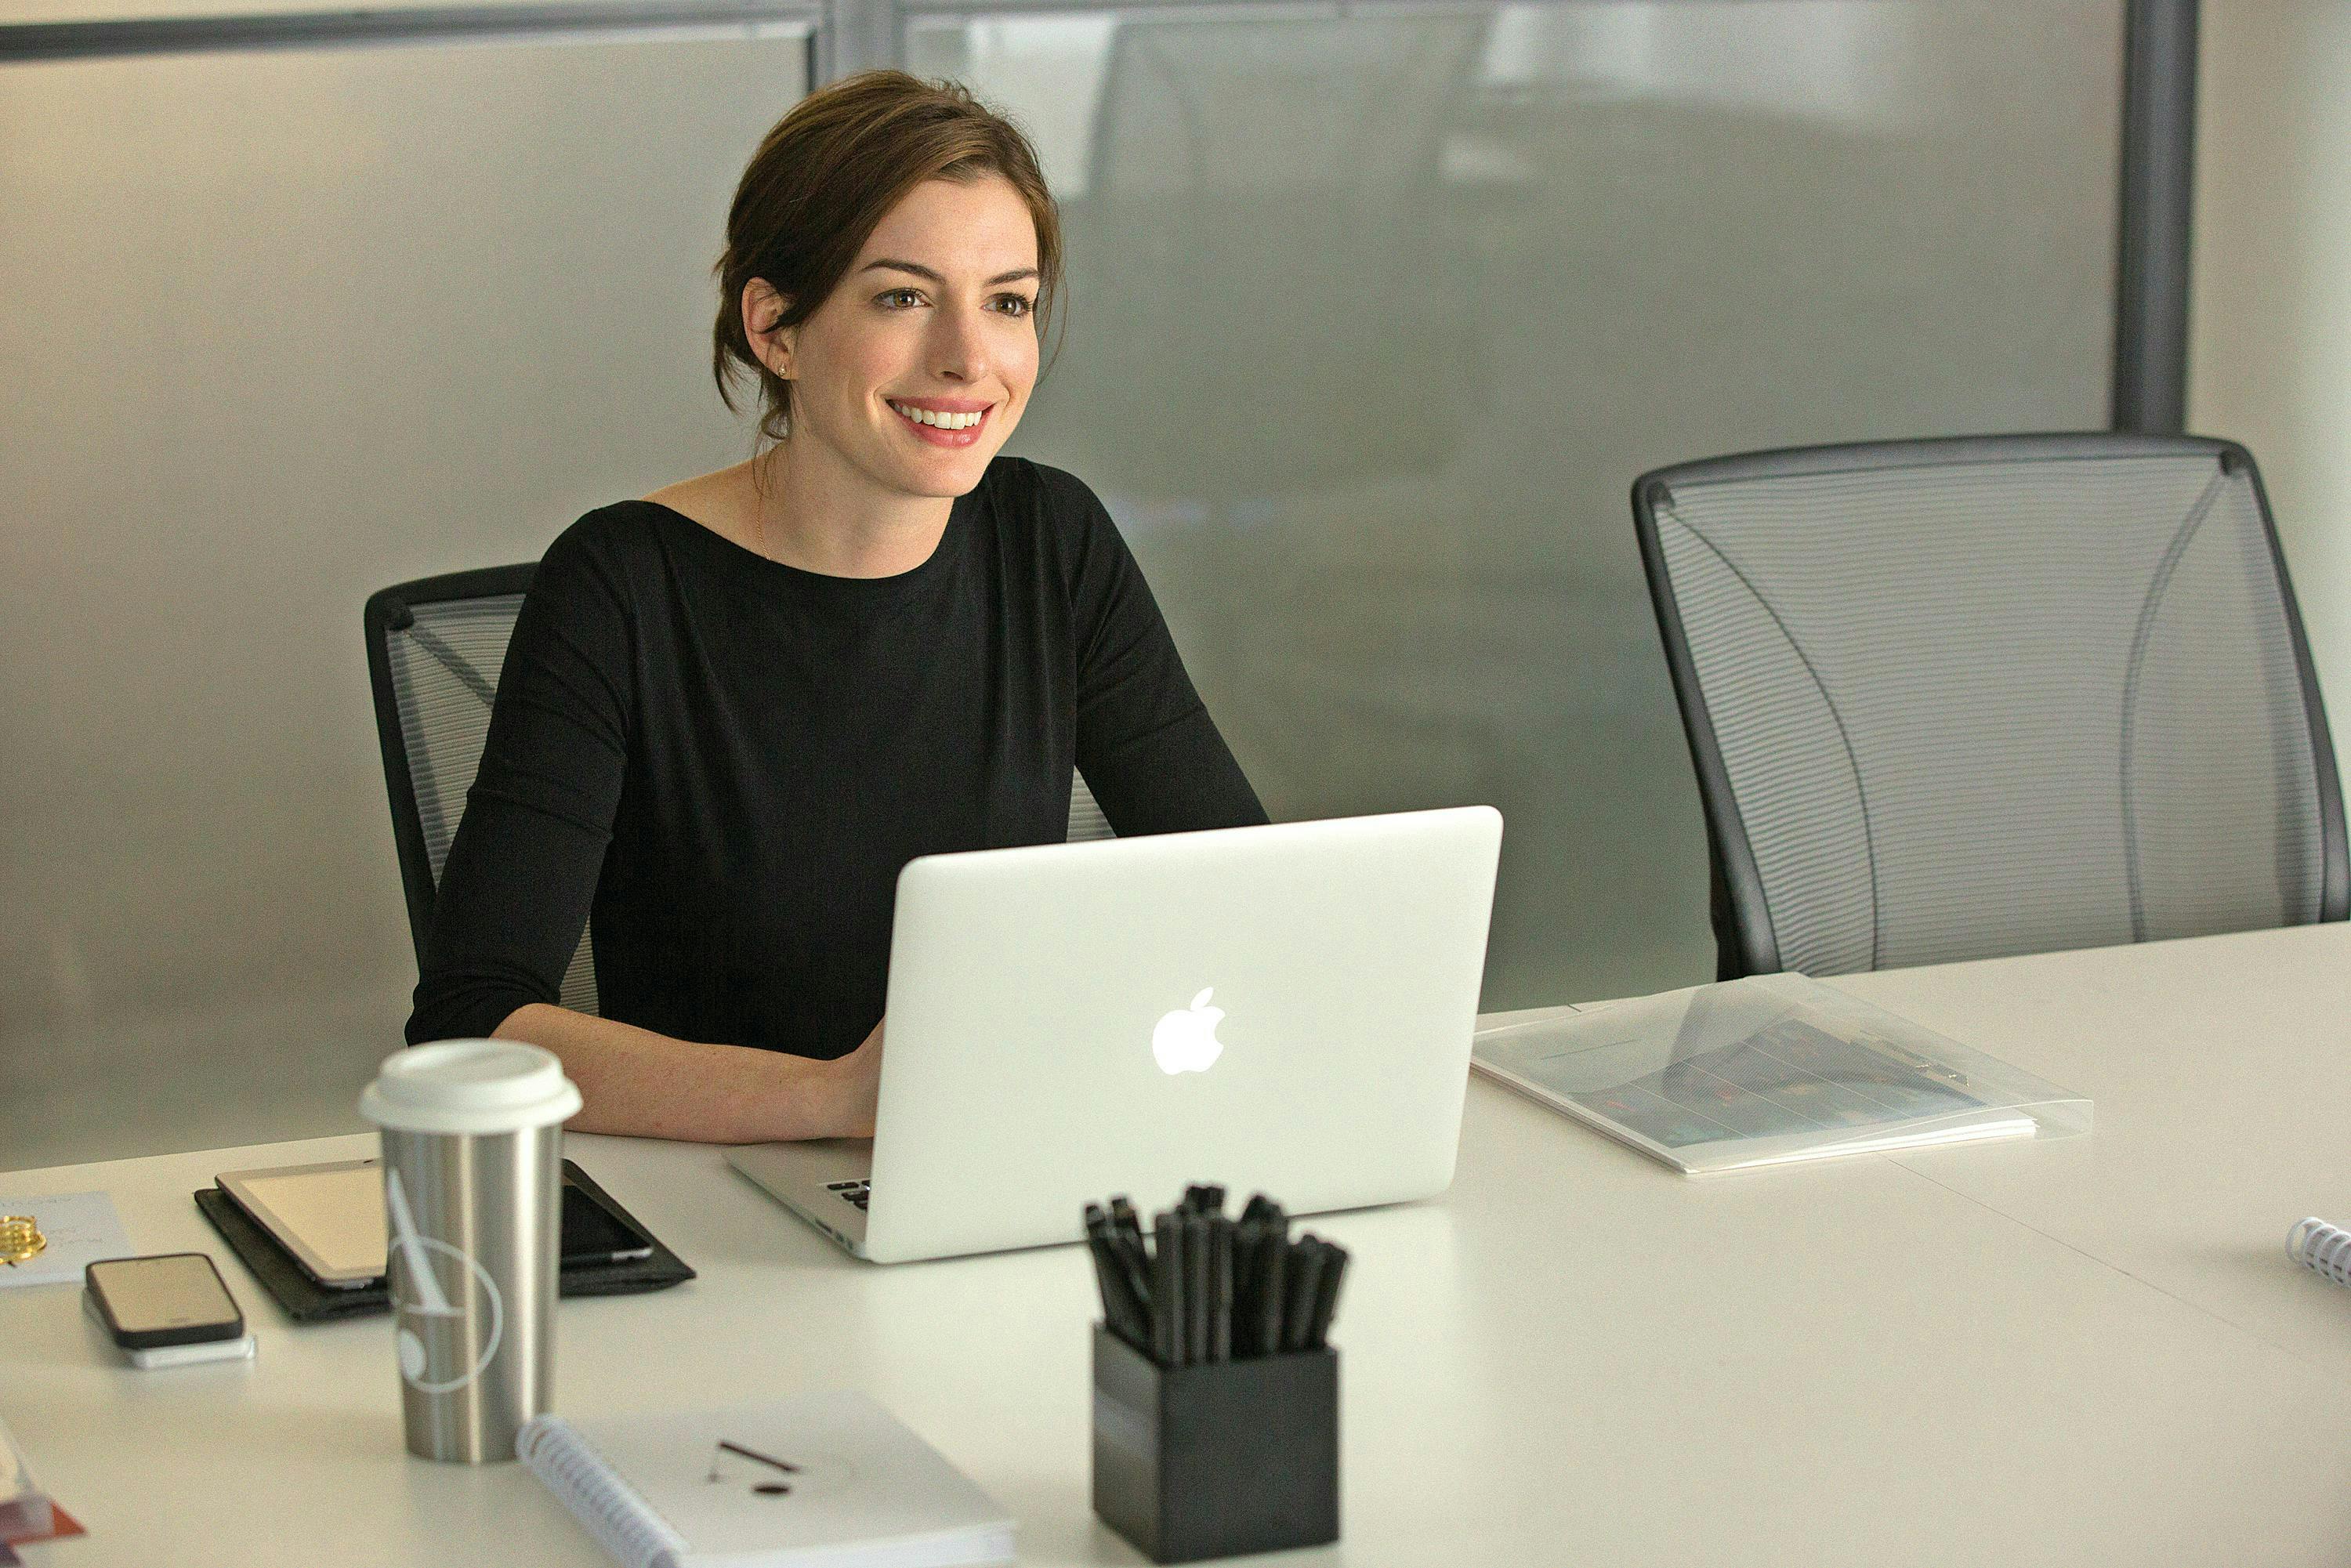 jules ostin-anne hathaway pc computer electronics furniture person human sitting laptop table desk